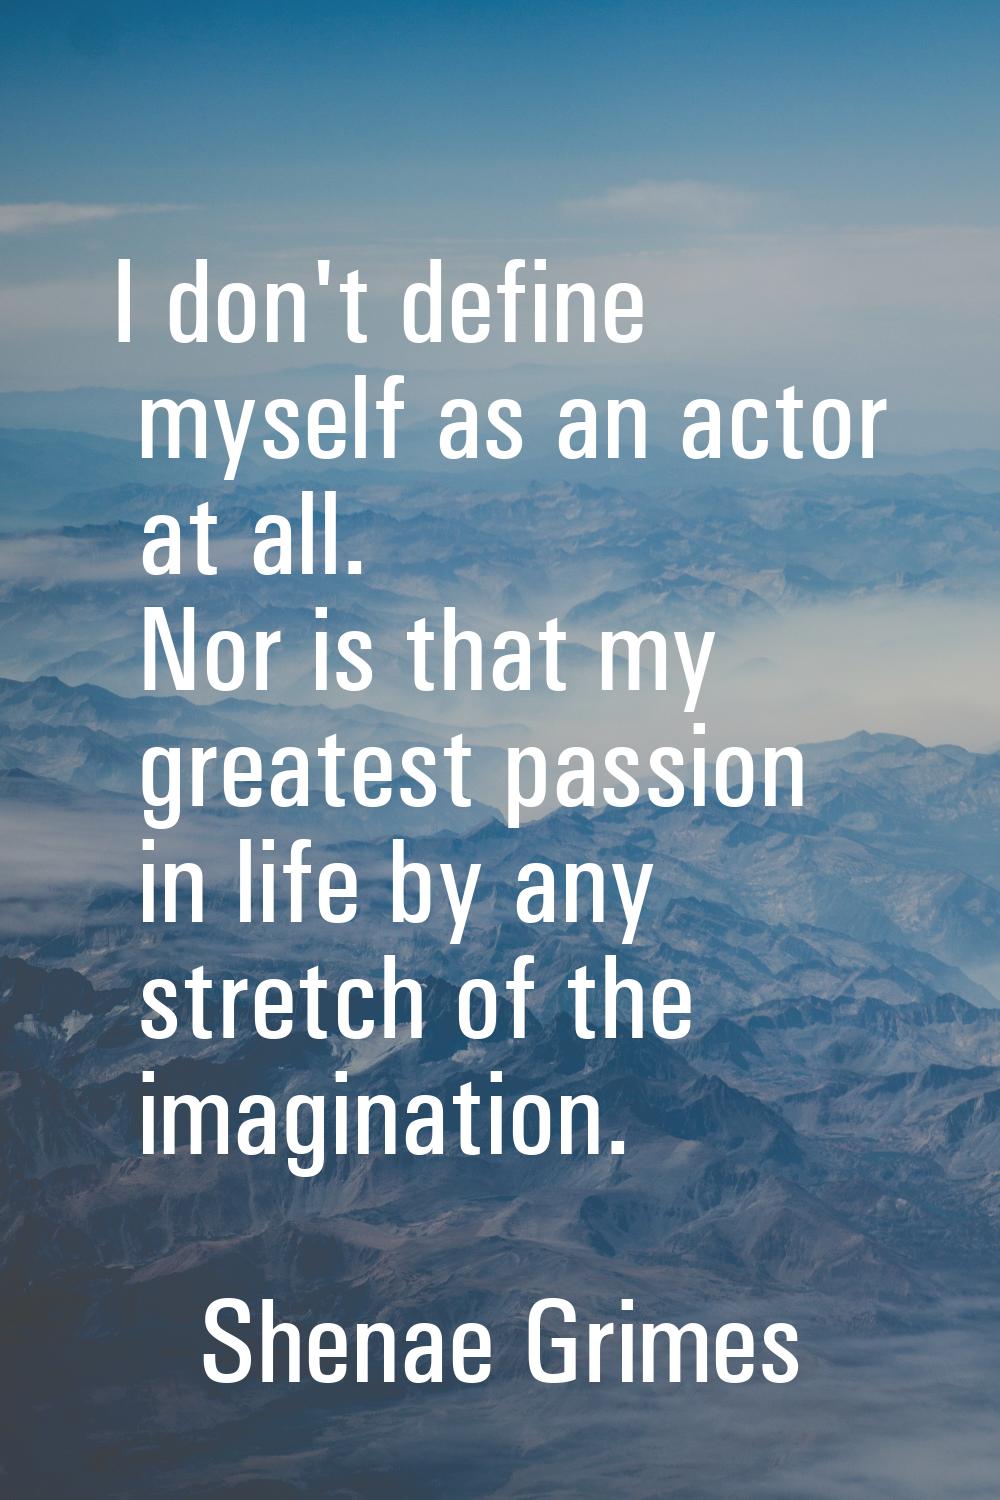 I don't define myself as an actor at all. Nor is that my greatest passion in life by any stretch of